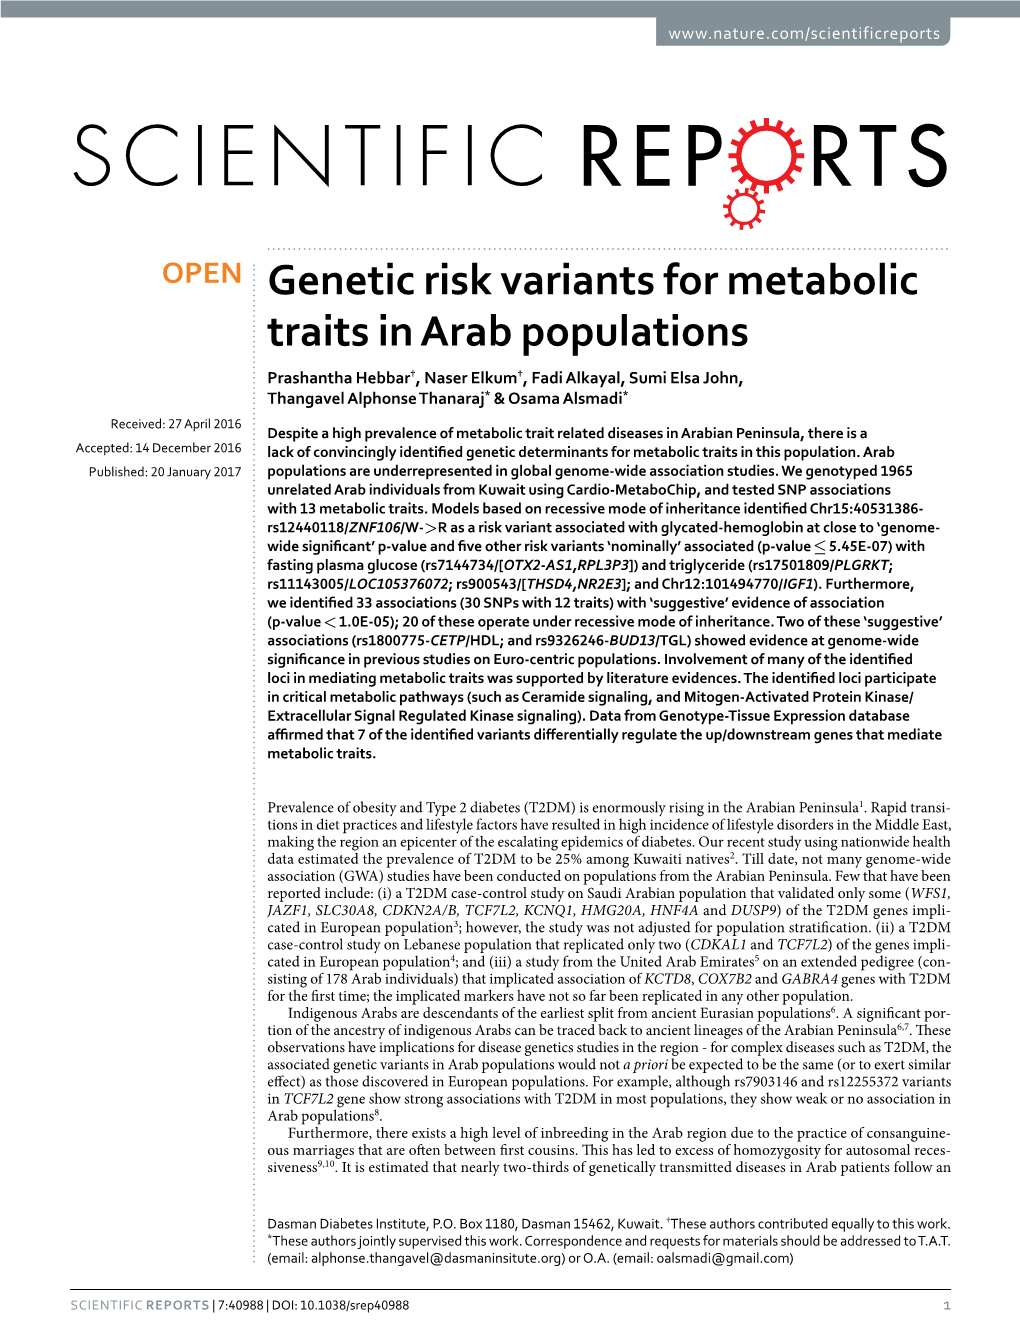 Genetic Risk Variants for Metabolic Traits in Arab Populations